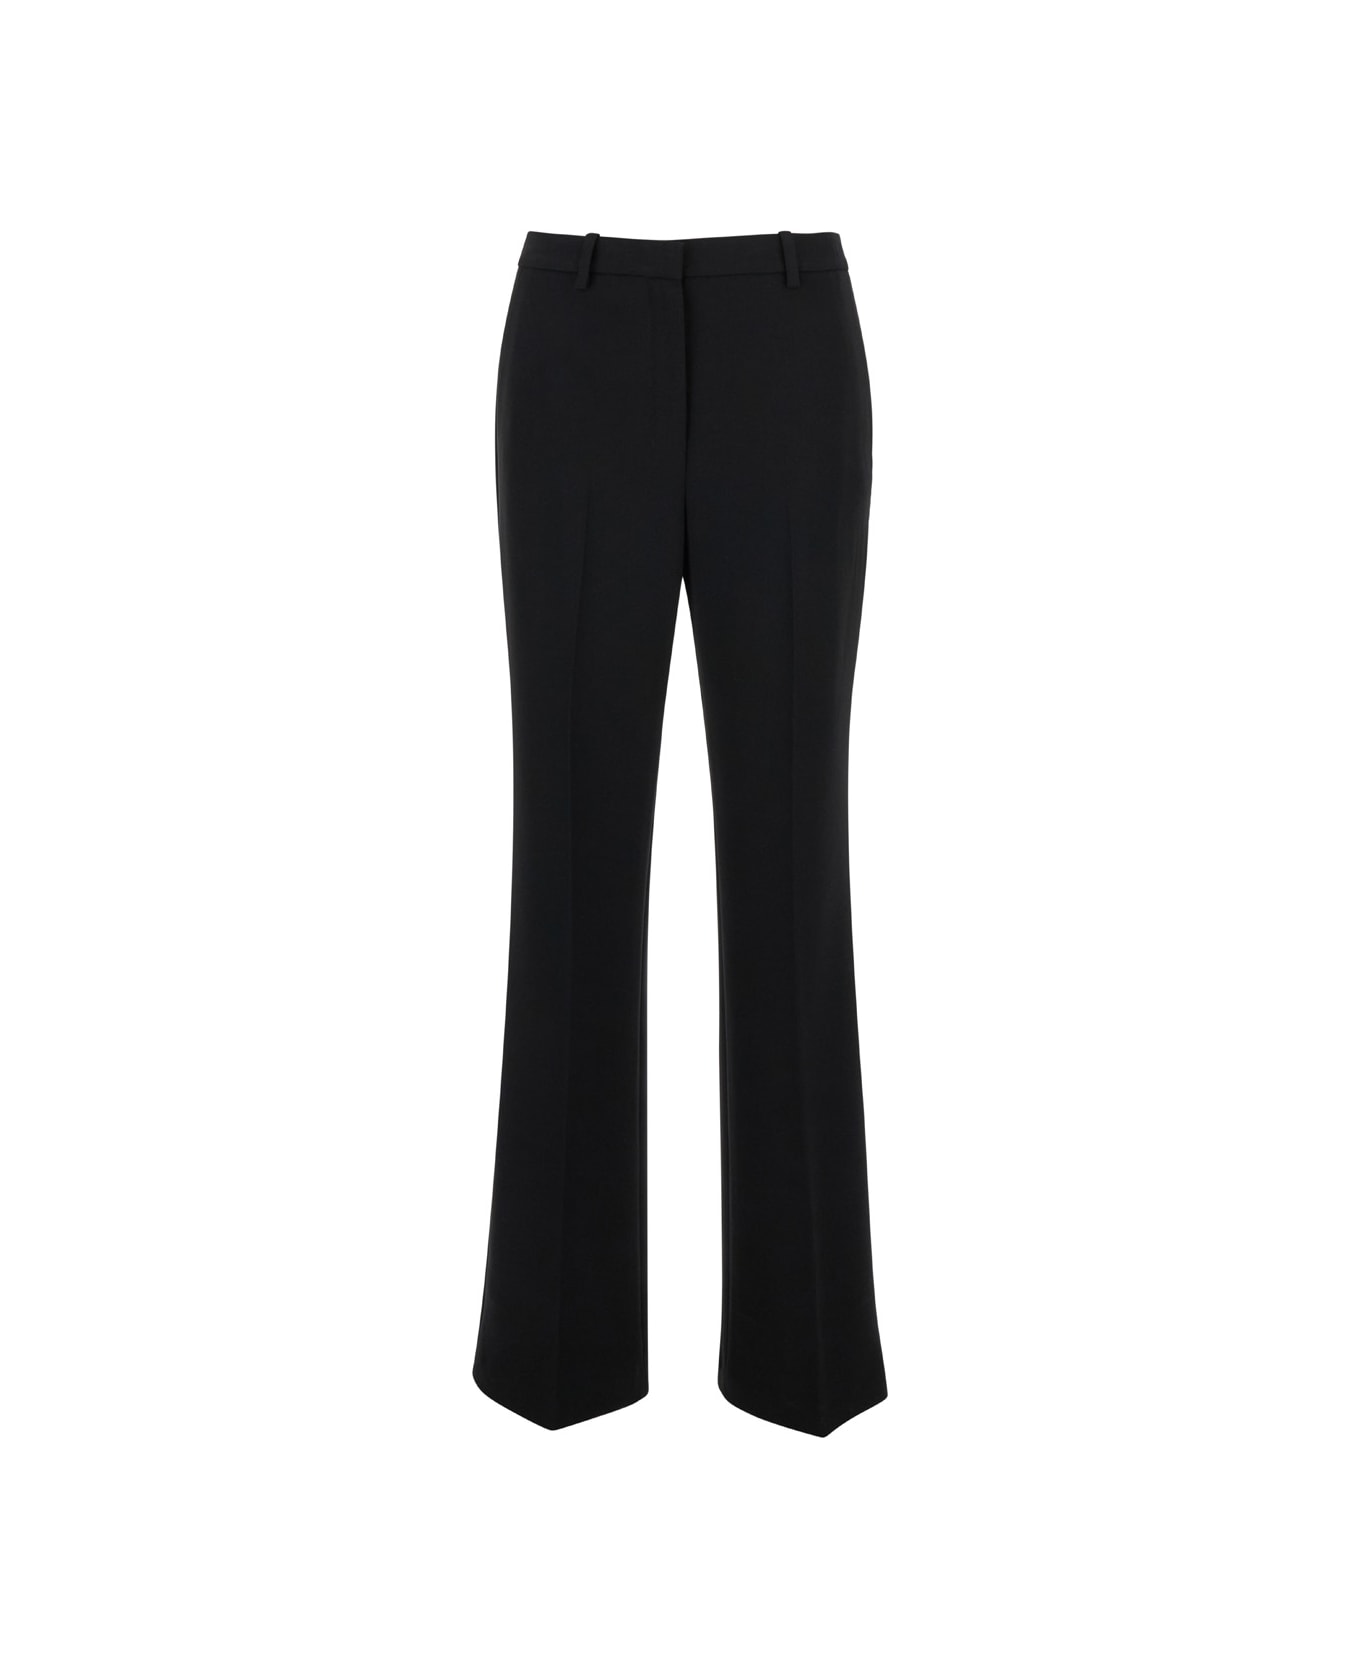 Theory Black Sartorial Pants With Stretch Pleat In Technical Fabric Woman - Black ボトムス